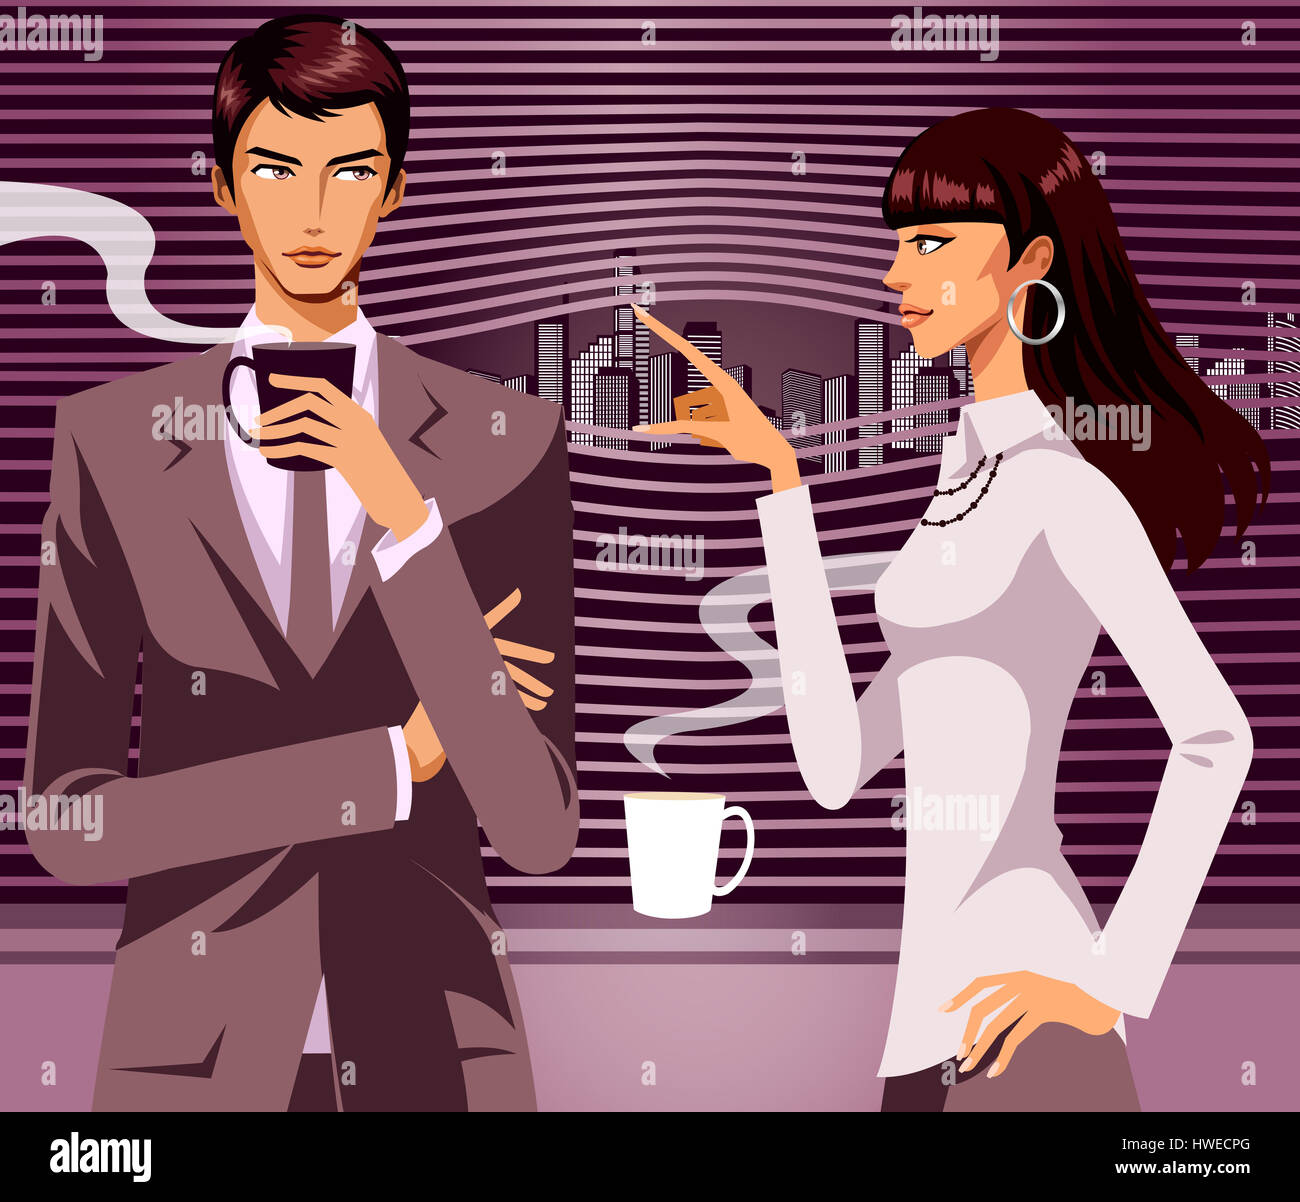 man,woman,female,building,outside view,looking,recreation,buildings,one man,one female,business woman,business man,single woman,couple,employee,employer,business wear,drinking,cup,coffee,beverage,refresh,window,hot,steam,hair,brown hair,style,waist up,smart,adult,animation,art,artwork,bonding,cartoon,cgi, Stock Photo